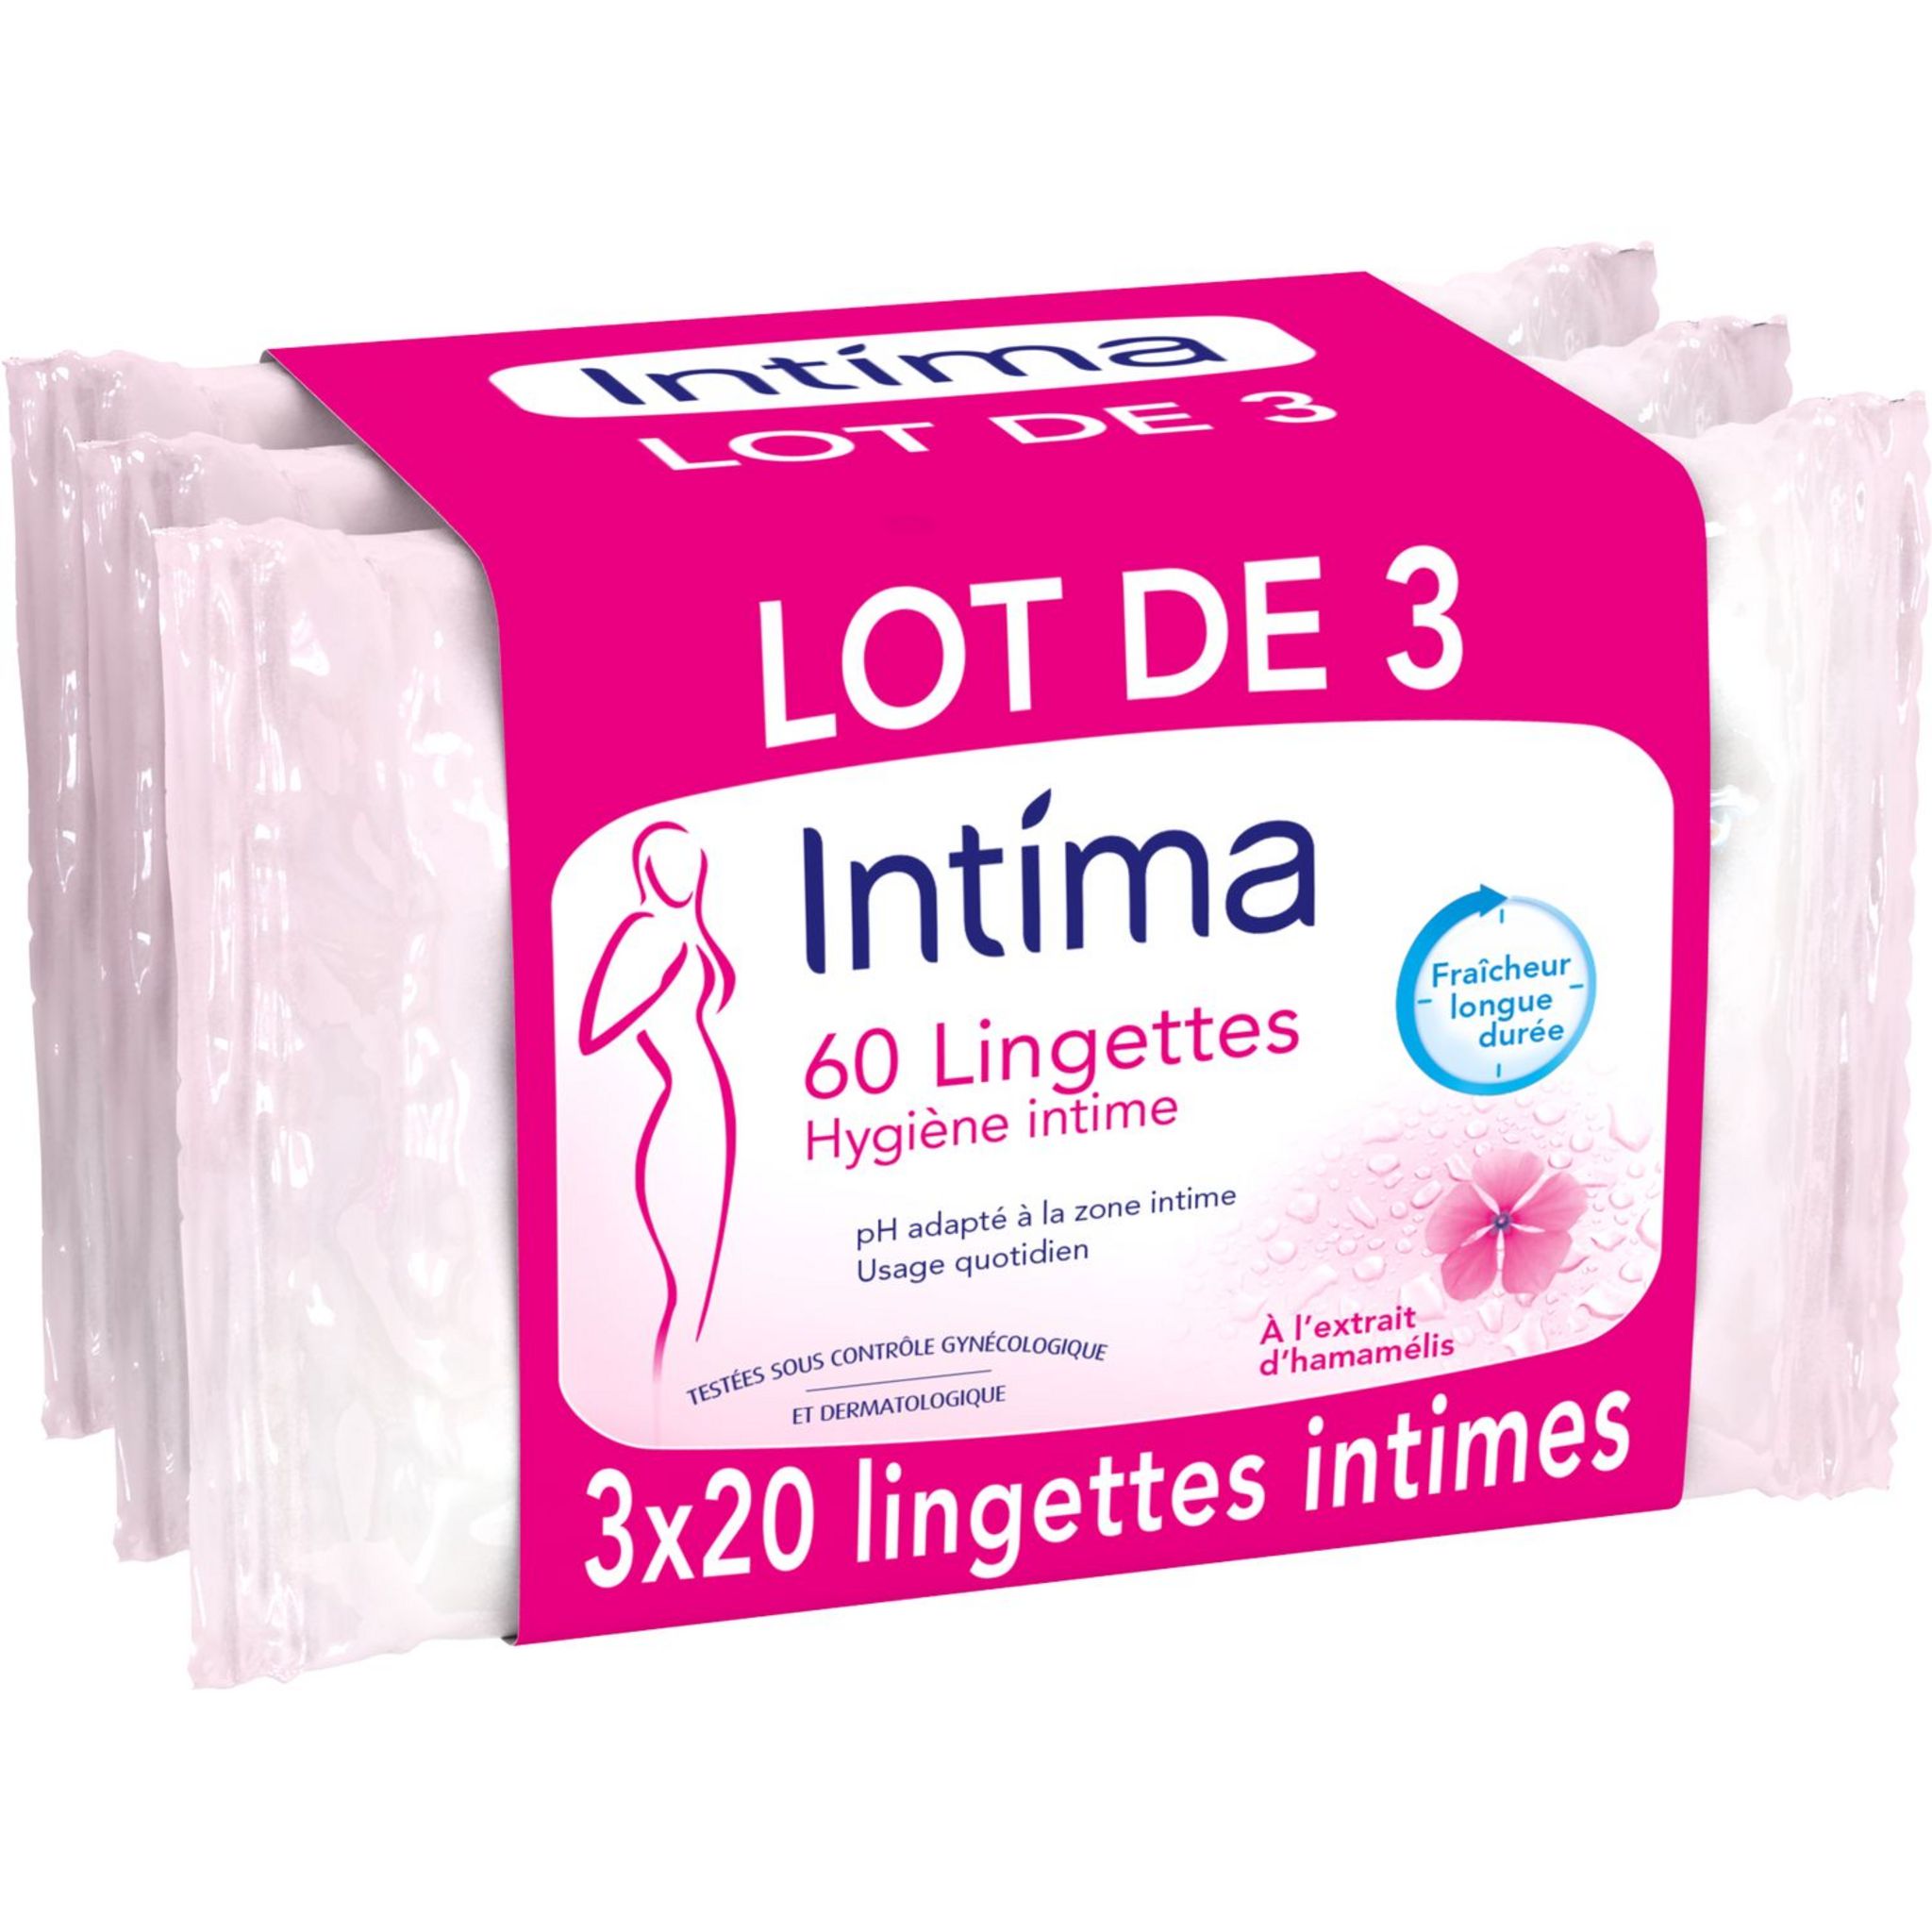 20 Lingettes Intimes